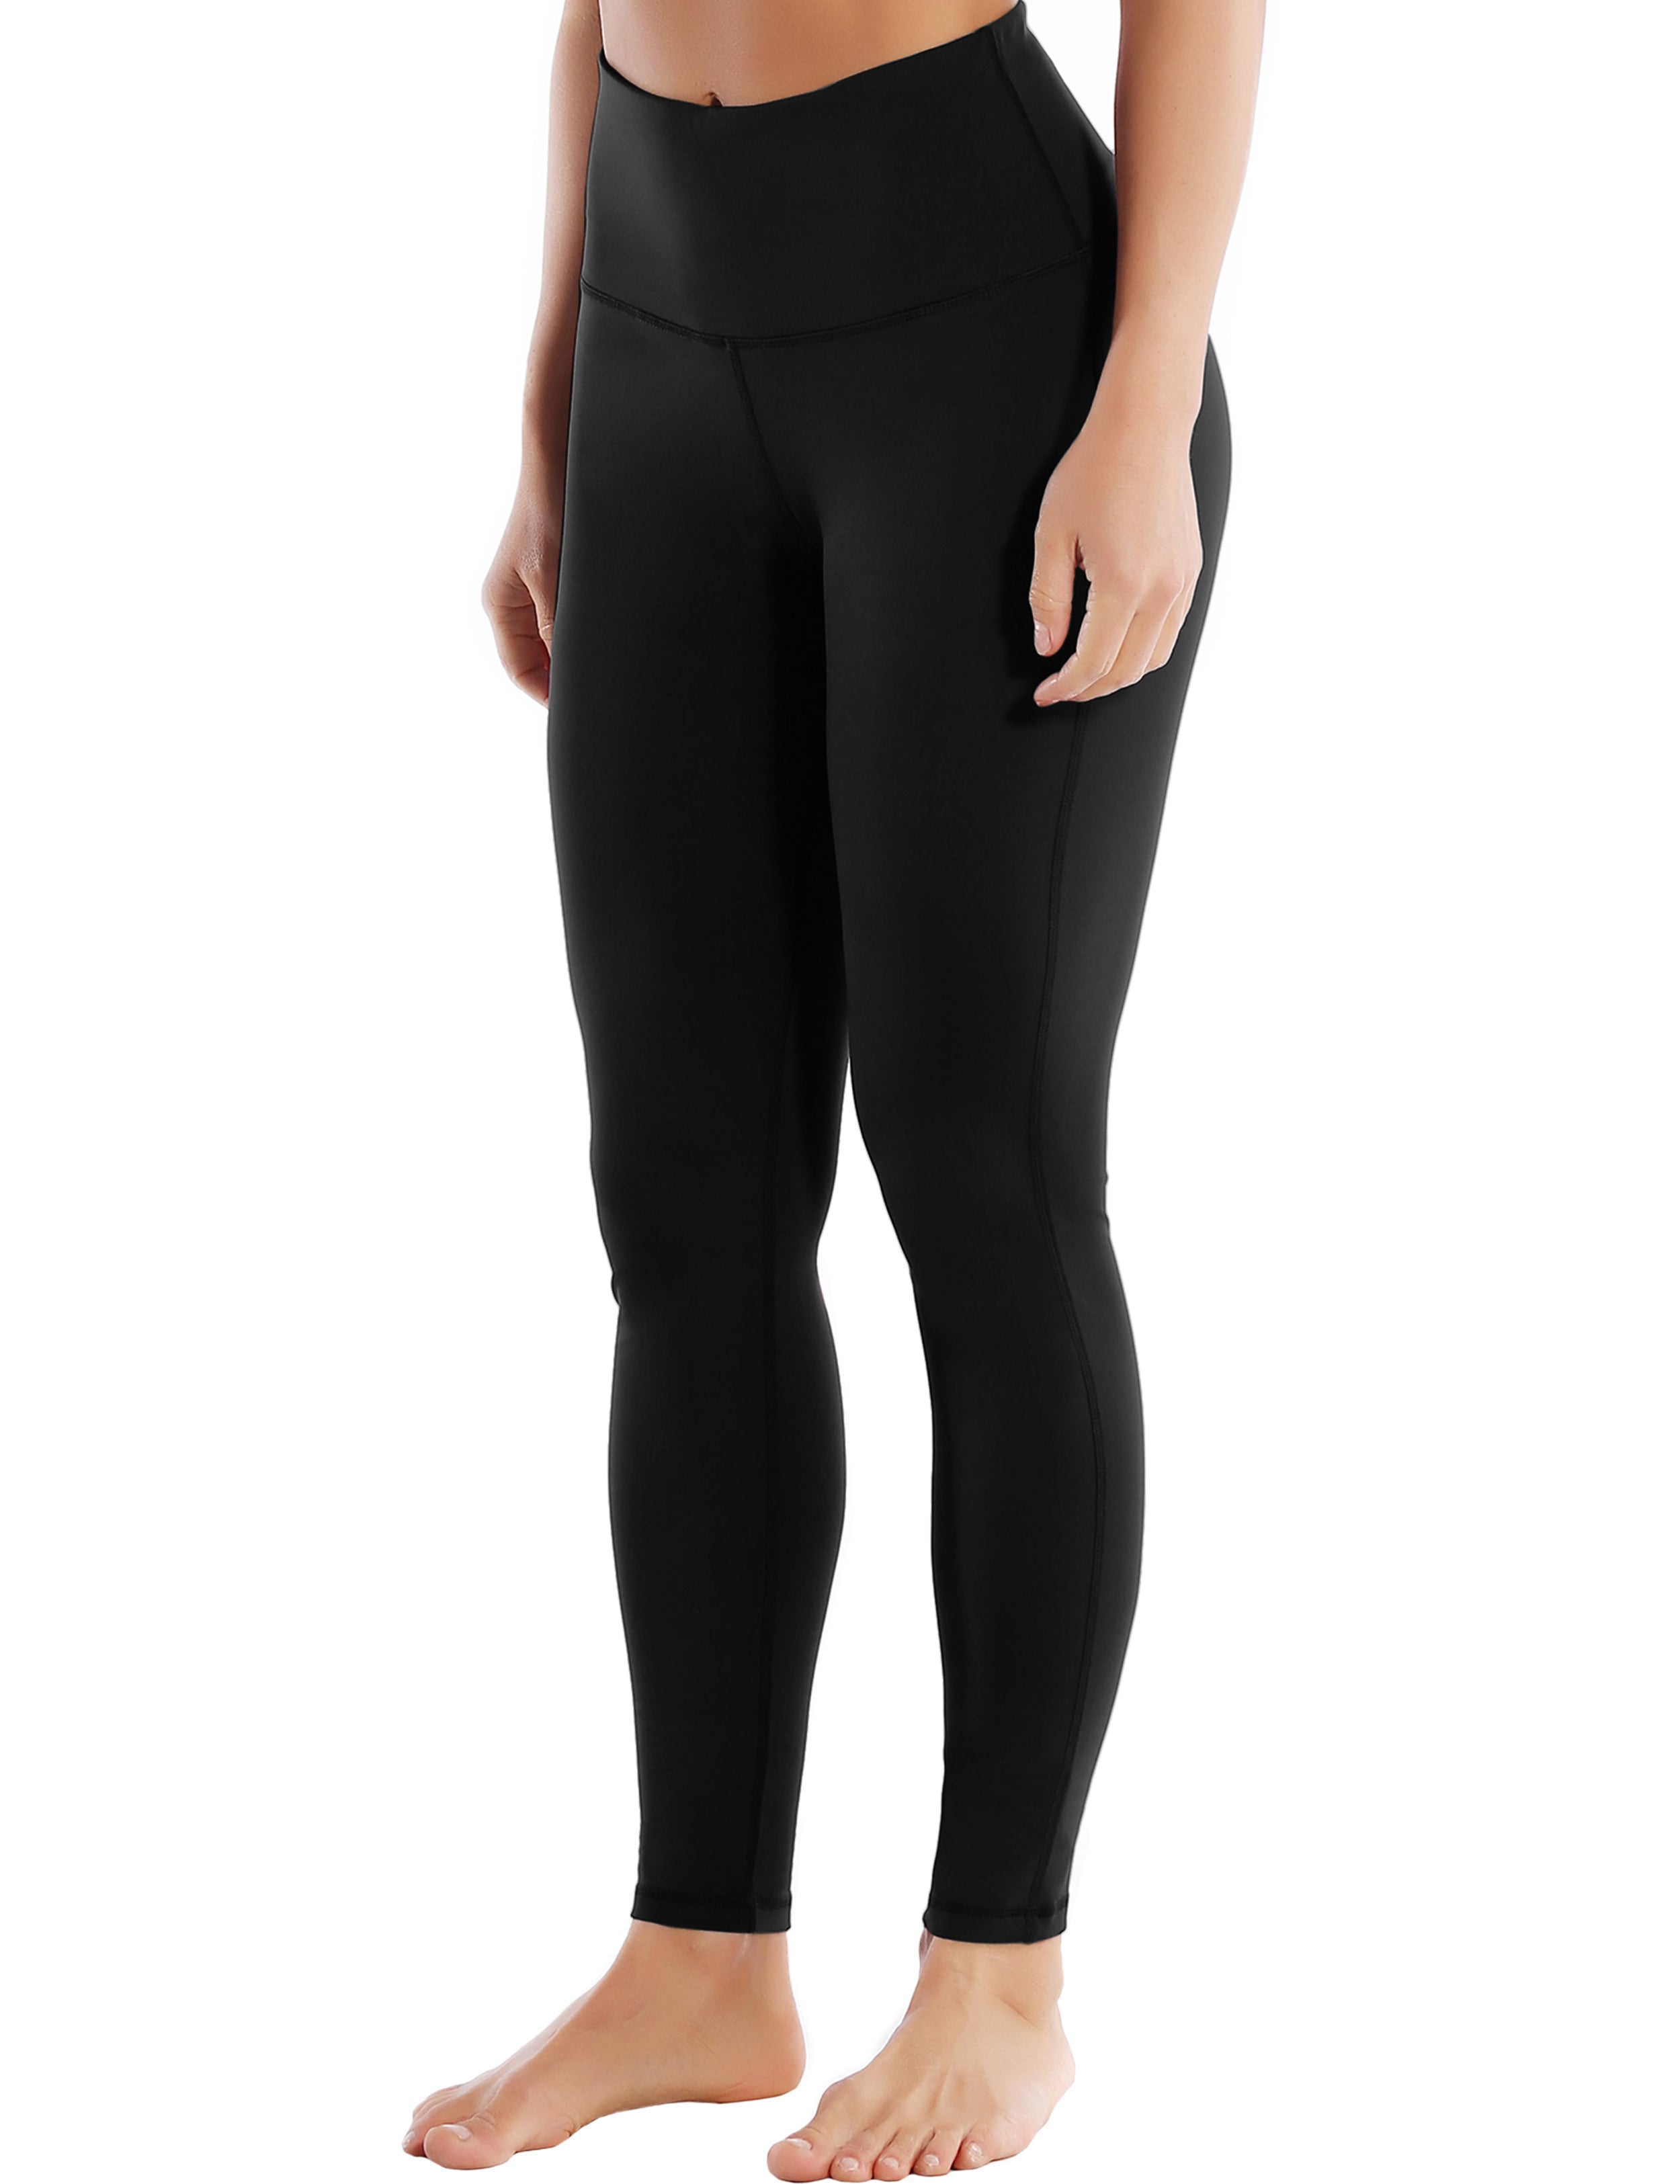 High Waist Side Line Jogging Pants black Side Line is Make Your Legs Look Longer and Thinner 75%Nylon/25%Spandex Fabric doesn't attract lint easily 4-way stretch No see-through Moisture-wicking Tummy control Inner pocket Two lengths